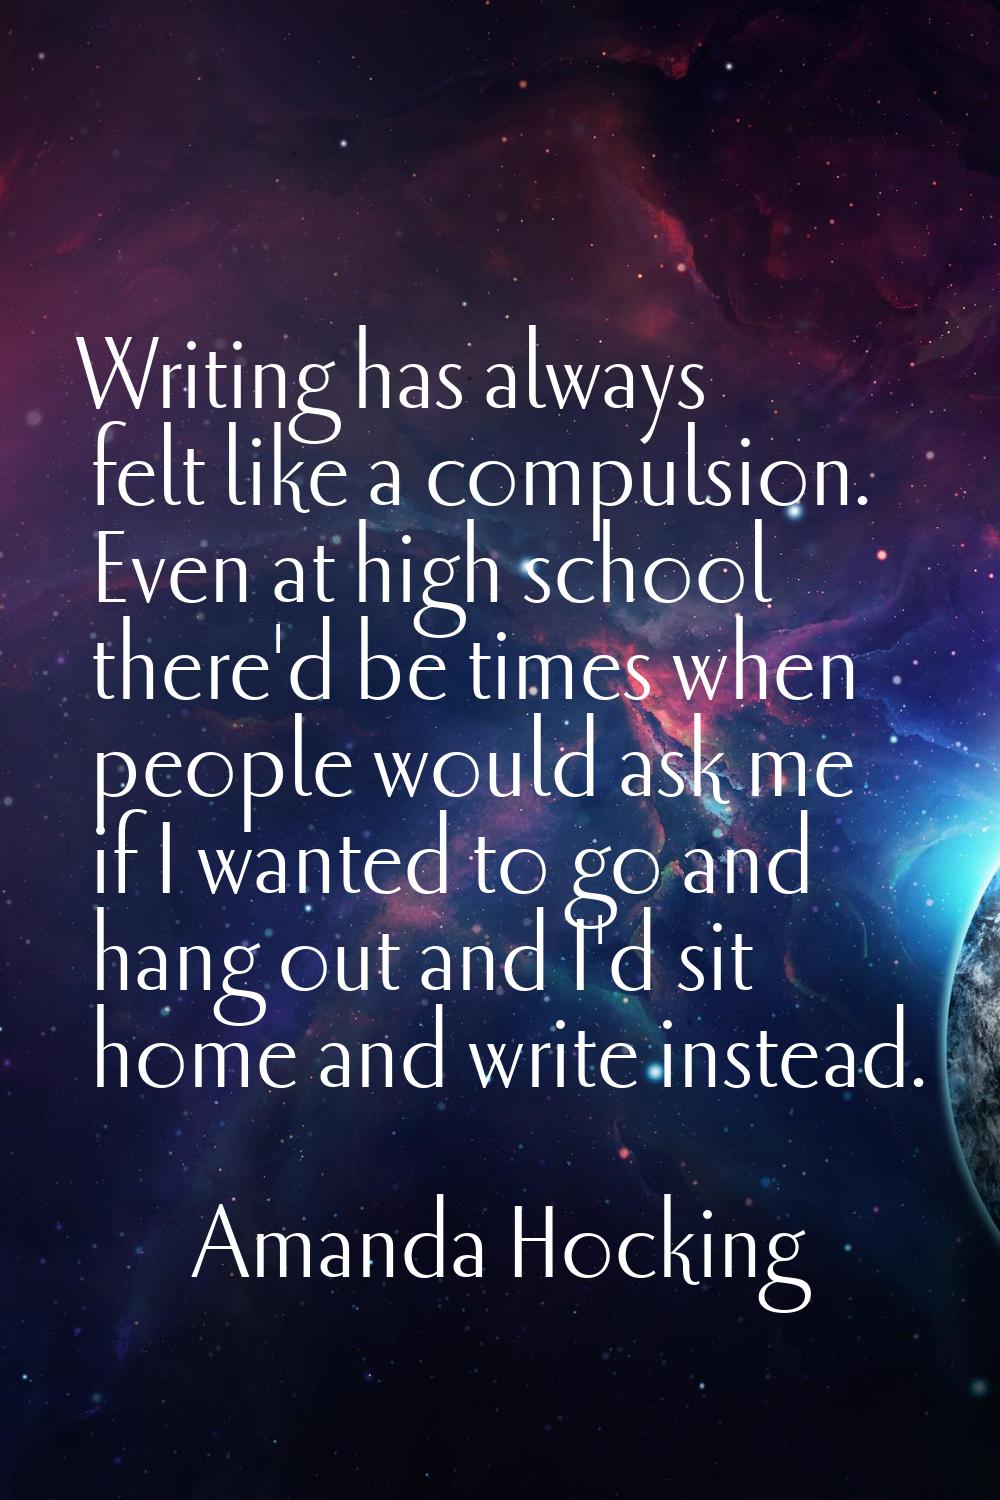 Writing has always felt like a compulsion. Even at high school there'd be times when people would a